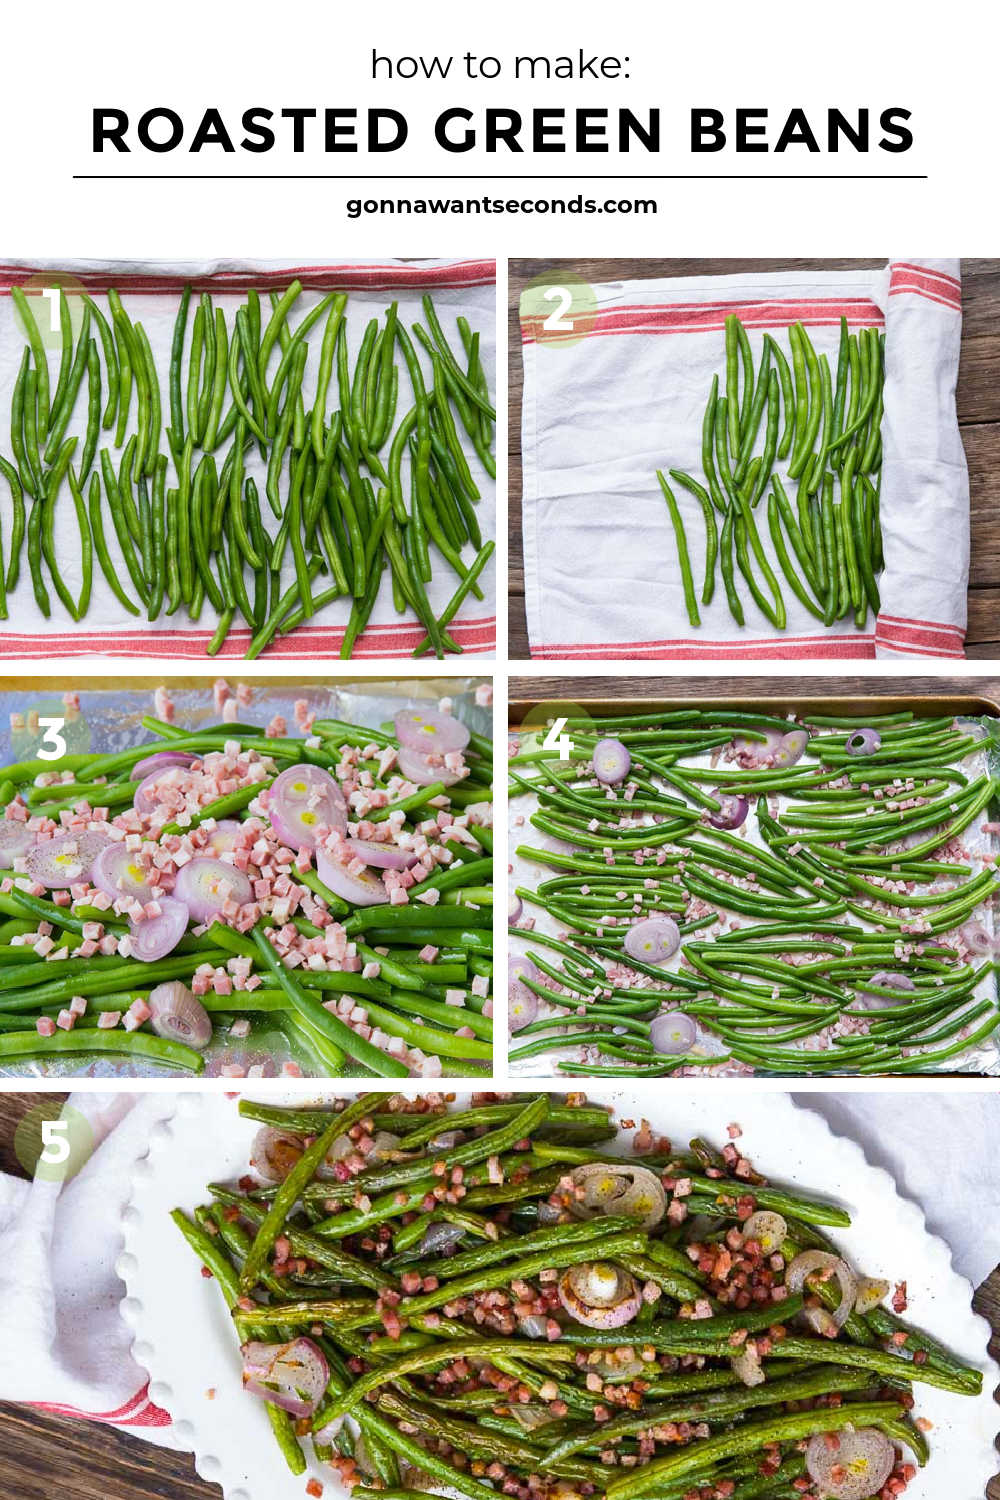 Step by step how to make roasted green beans